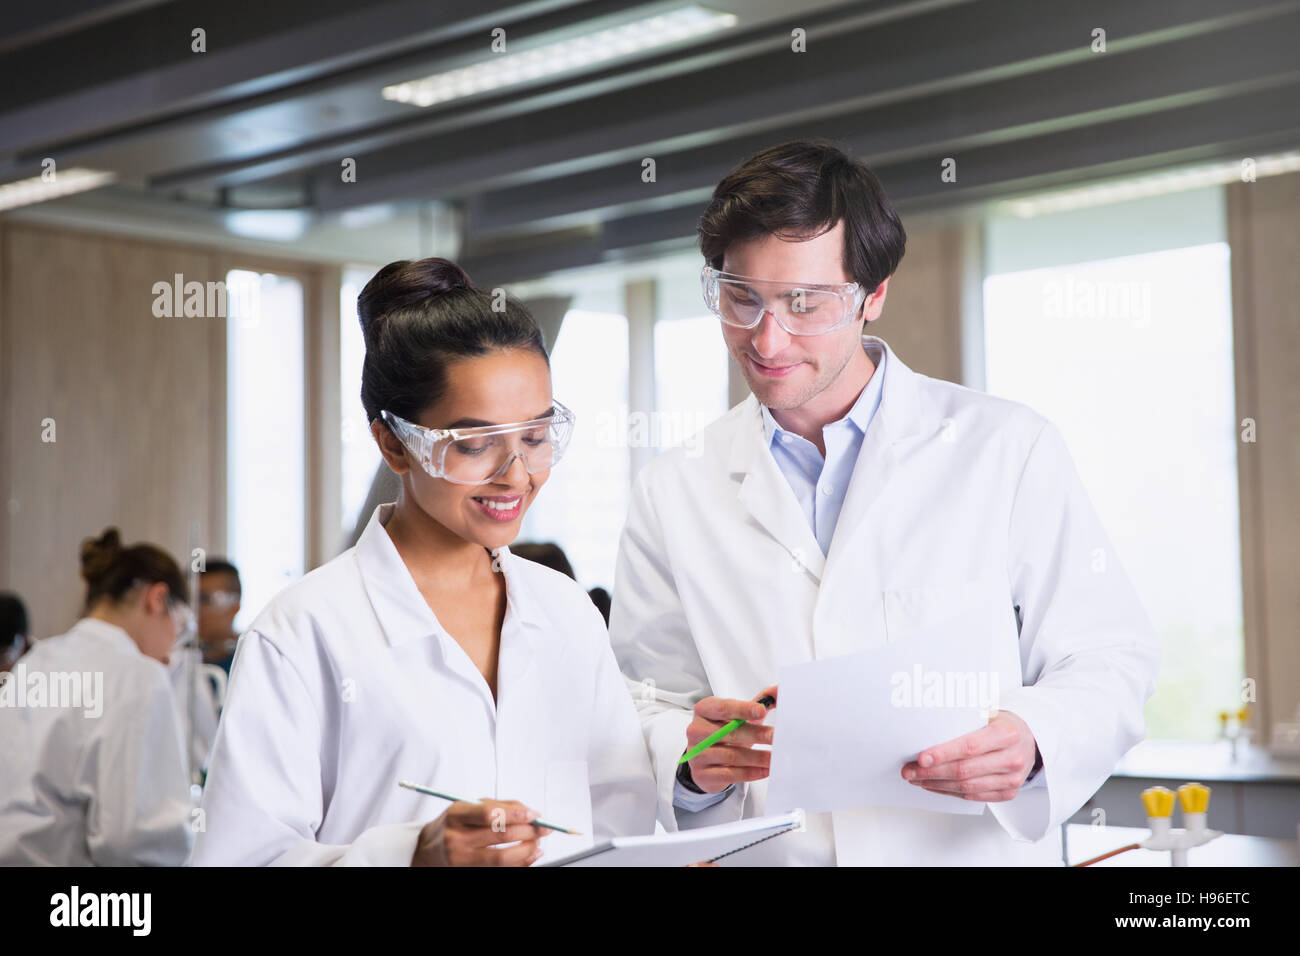 College students in lab coats discussing notes in science laboratory classroom Stock Photo